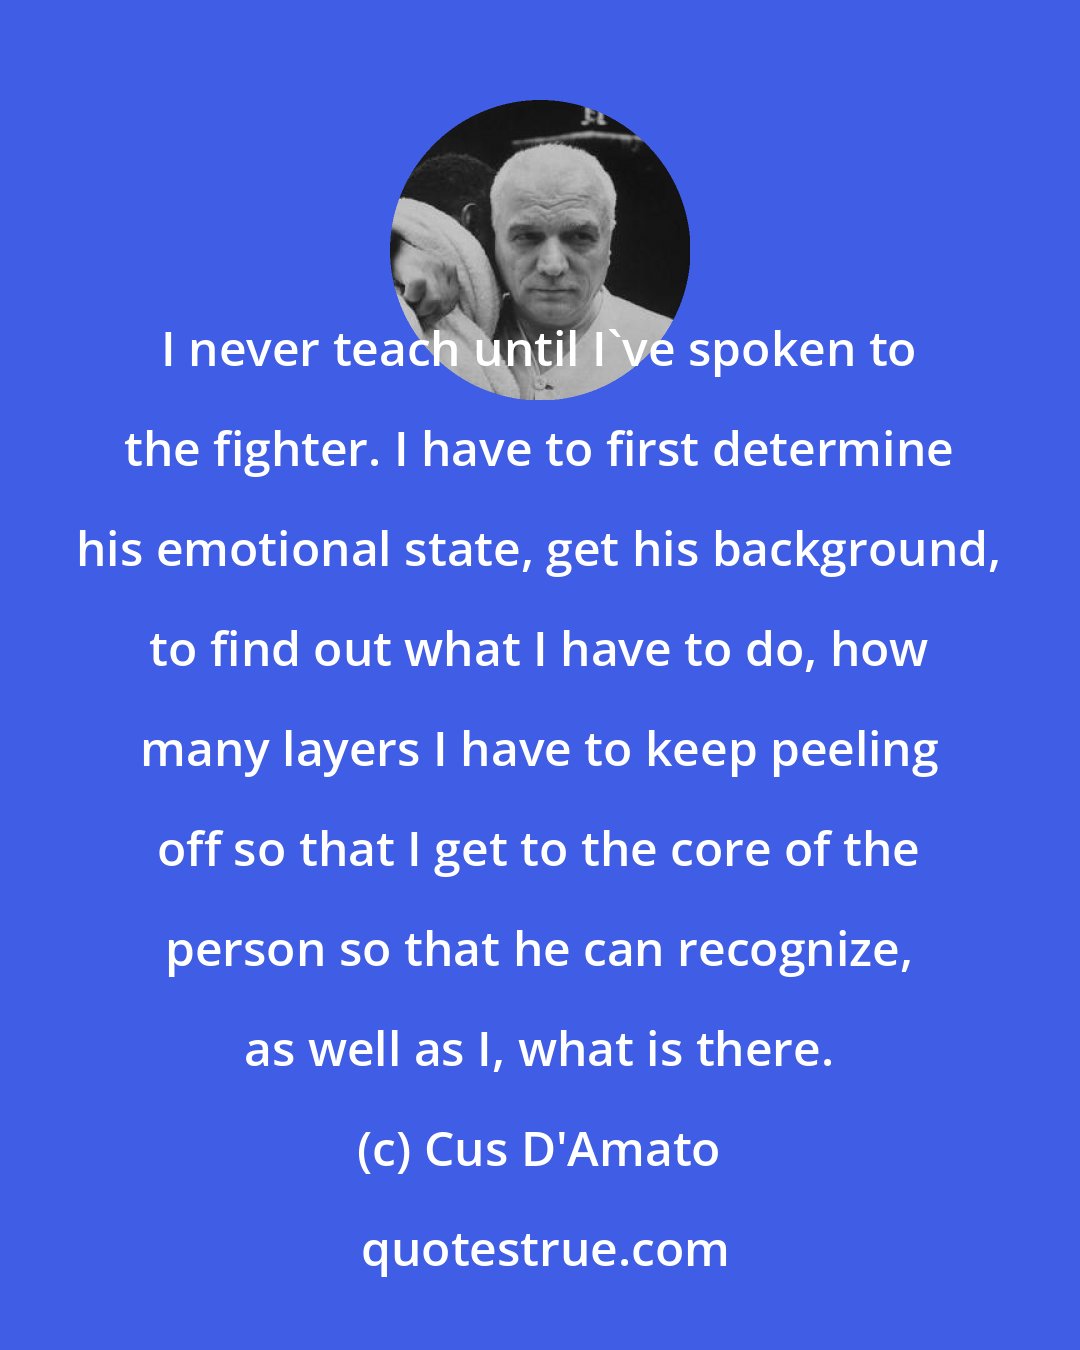 Cus D'Amato: I never teach until I've spoken to the fighter. I have to first determine his emotional state, get his background, to find out what I have to do, how many layers I have to keep peeling off so that I get to the core of the person so that he can recognize, as well as I, what is there.